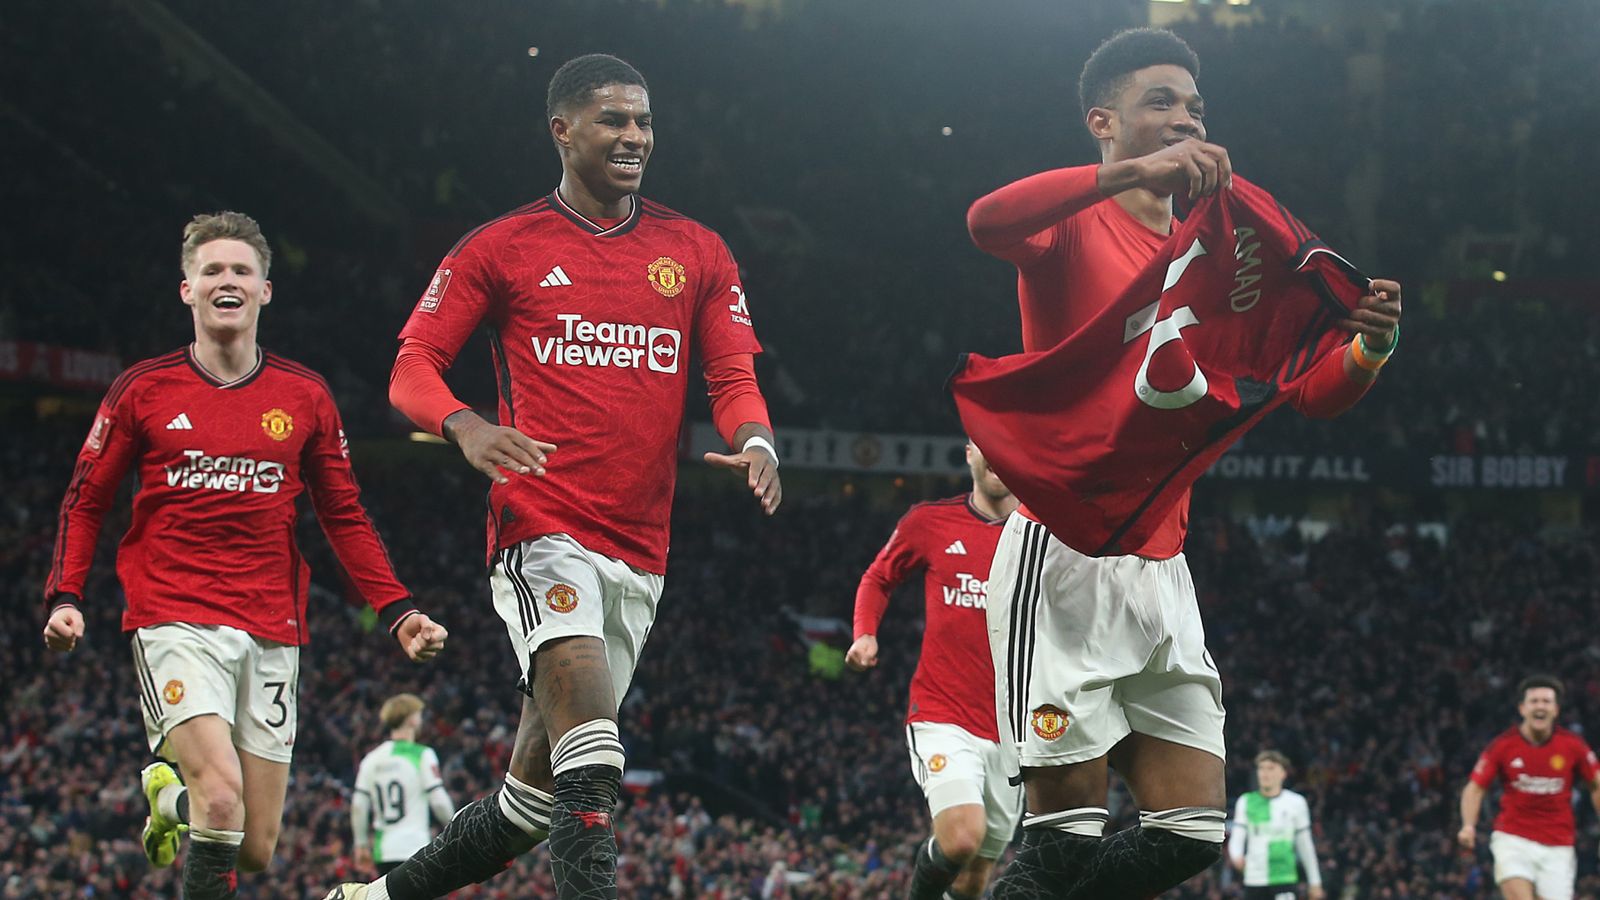 Man Utd draw Coventry in FA Cup semifinals and holders Man City face